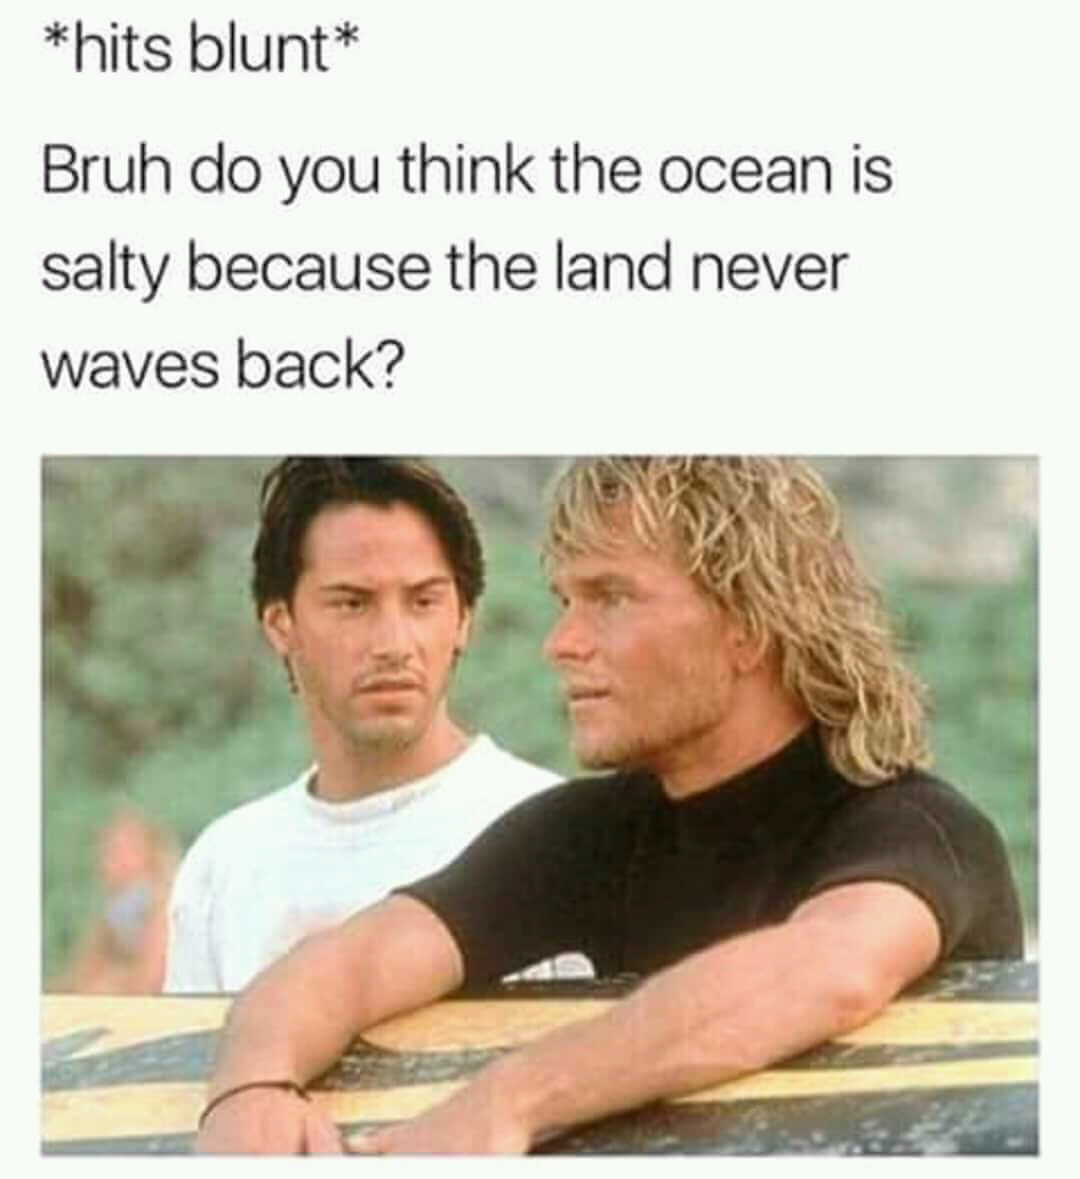 Hits blunt meme with a savage caption about the ocean.